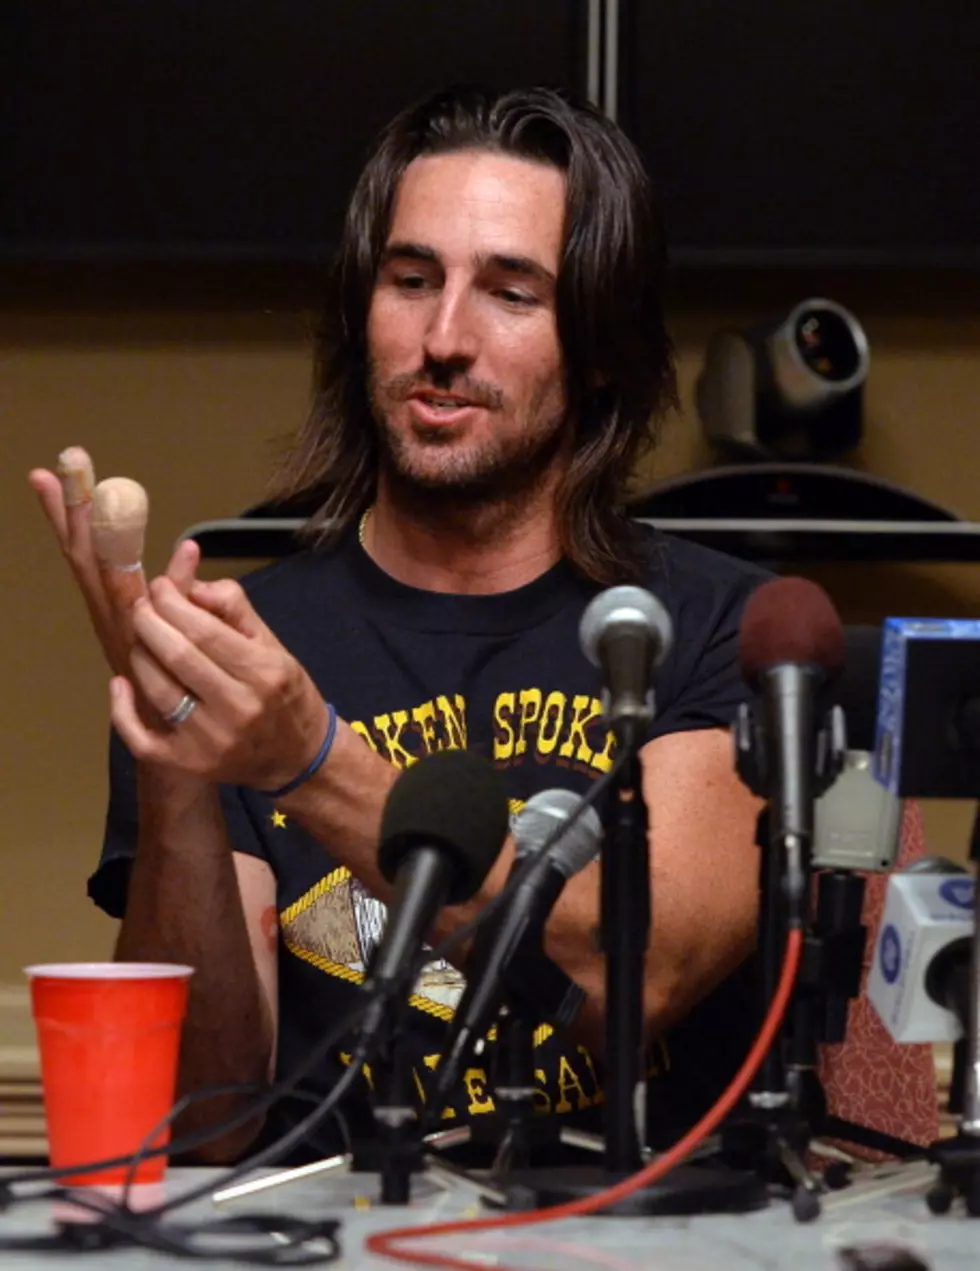 Jake Owen Loses Part of Finger, Shares Gruesome Picture [AUDIO & PHOTO]